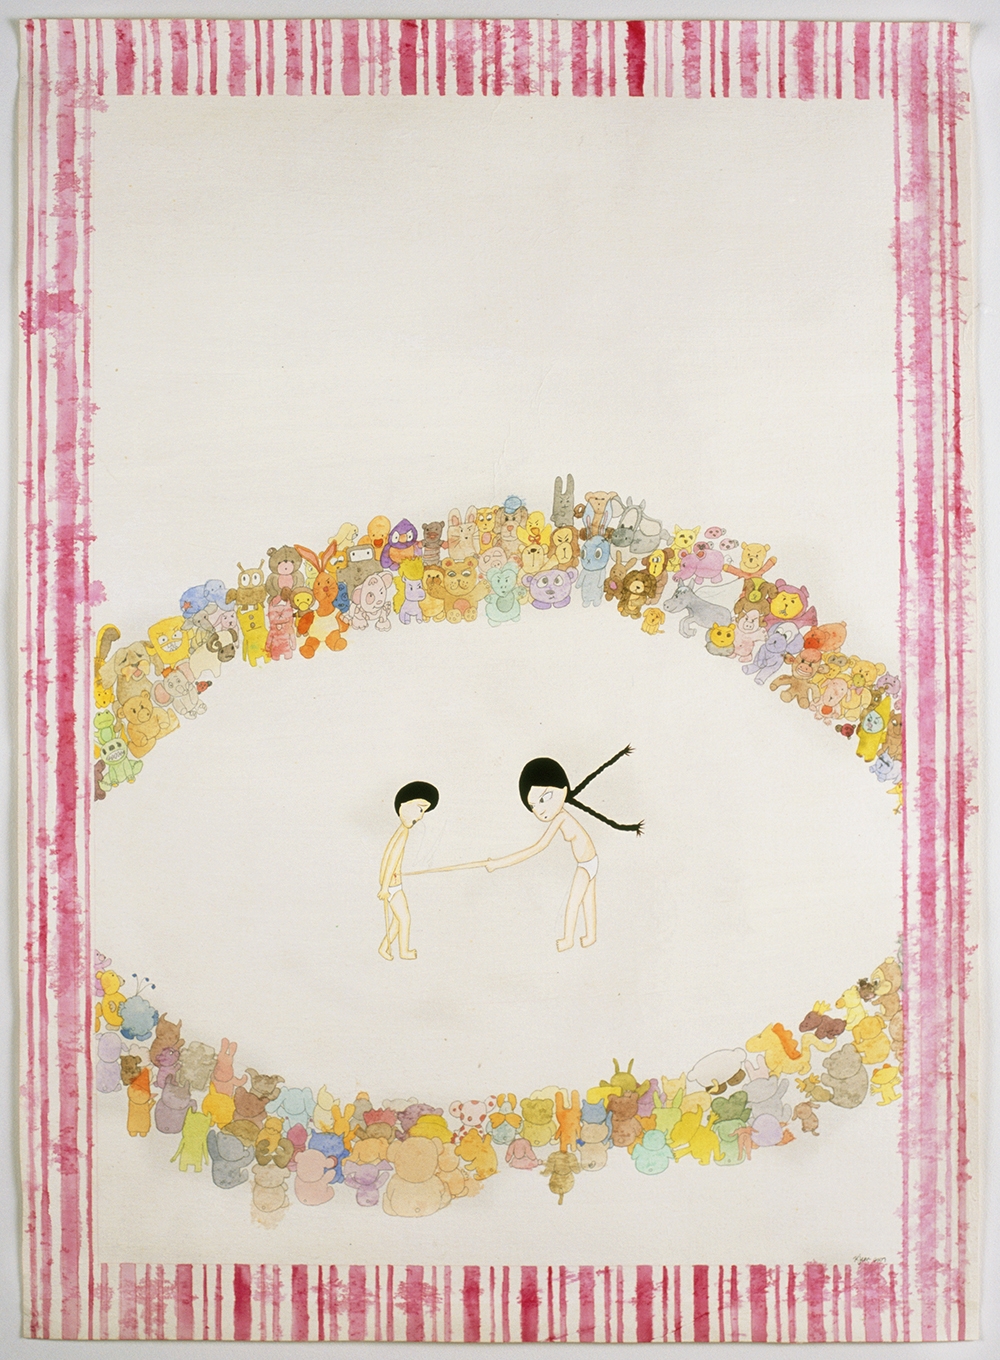 Artwork by Kyung Jeon titled One Fingered Duel, 2007, Gouache, graphite, watercolor on rice paper on canvas, 34.75 x 25.25 inches, 88.3 x 64.1 cm